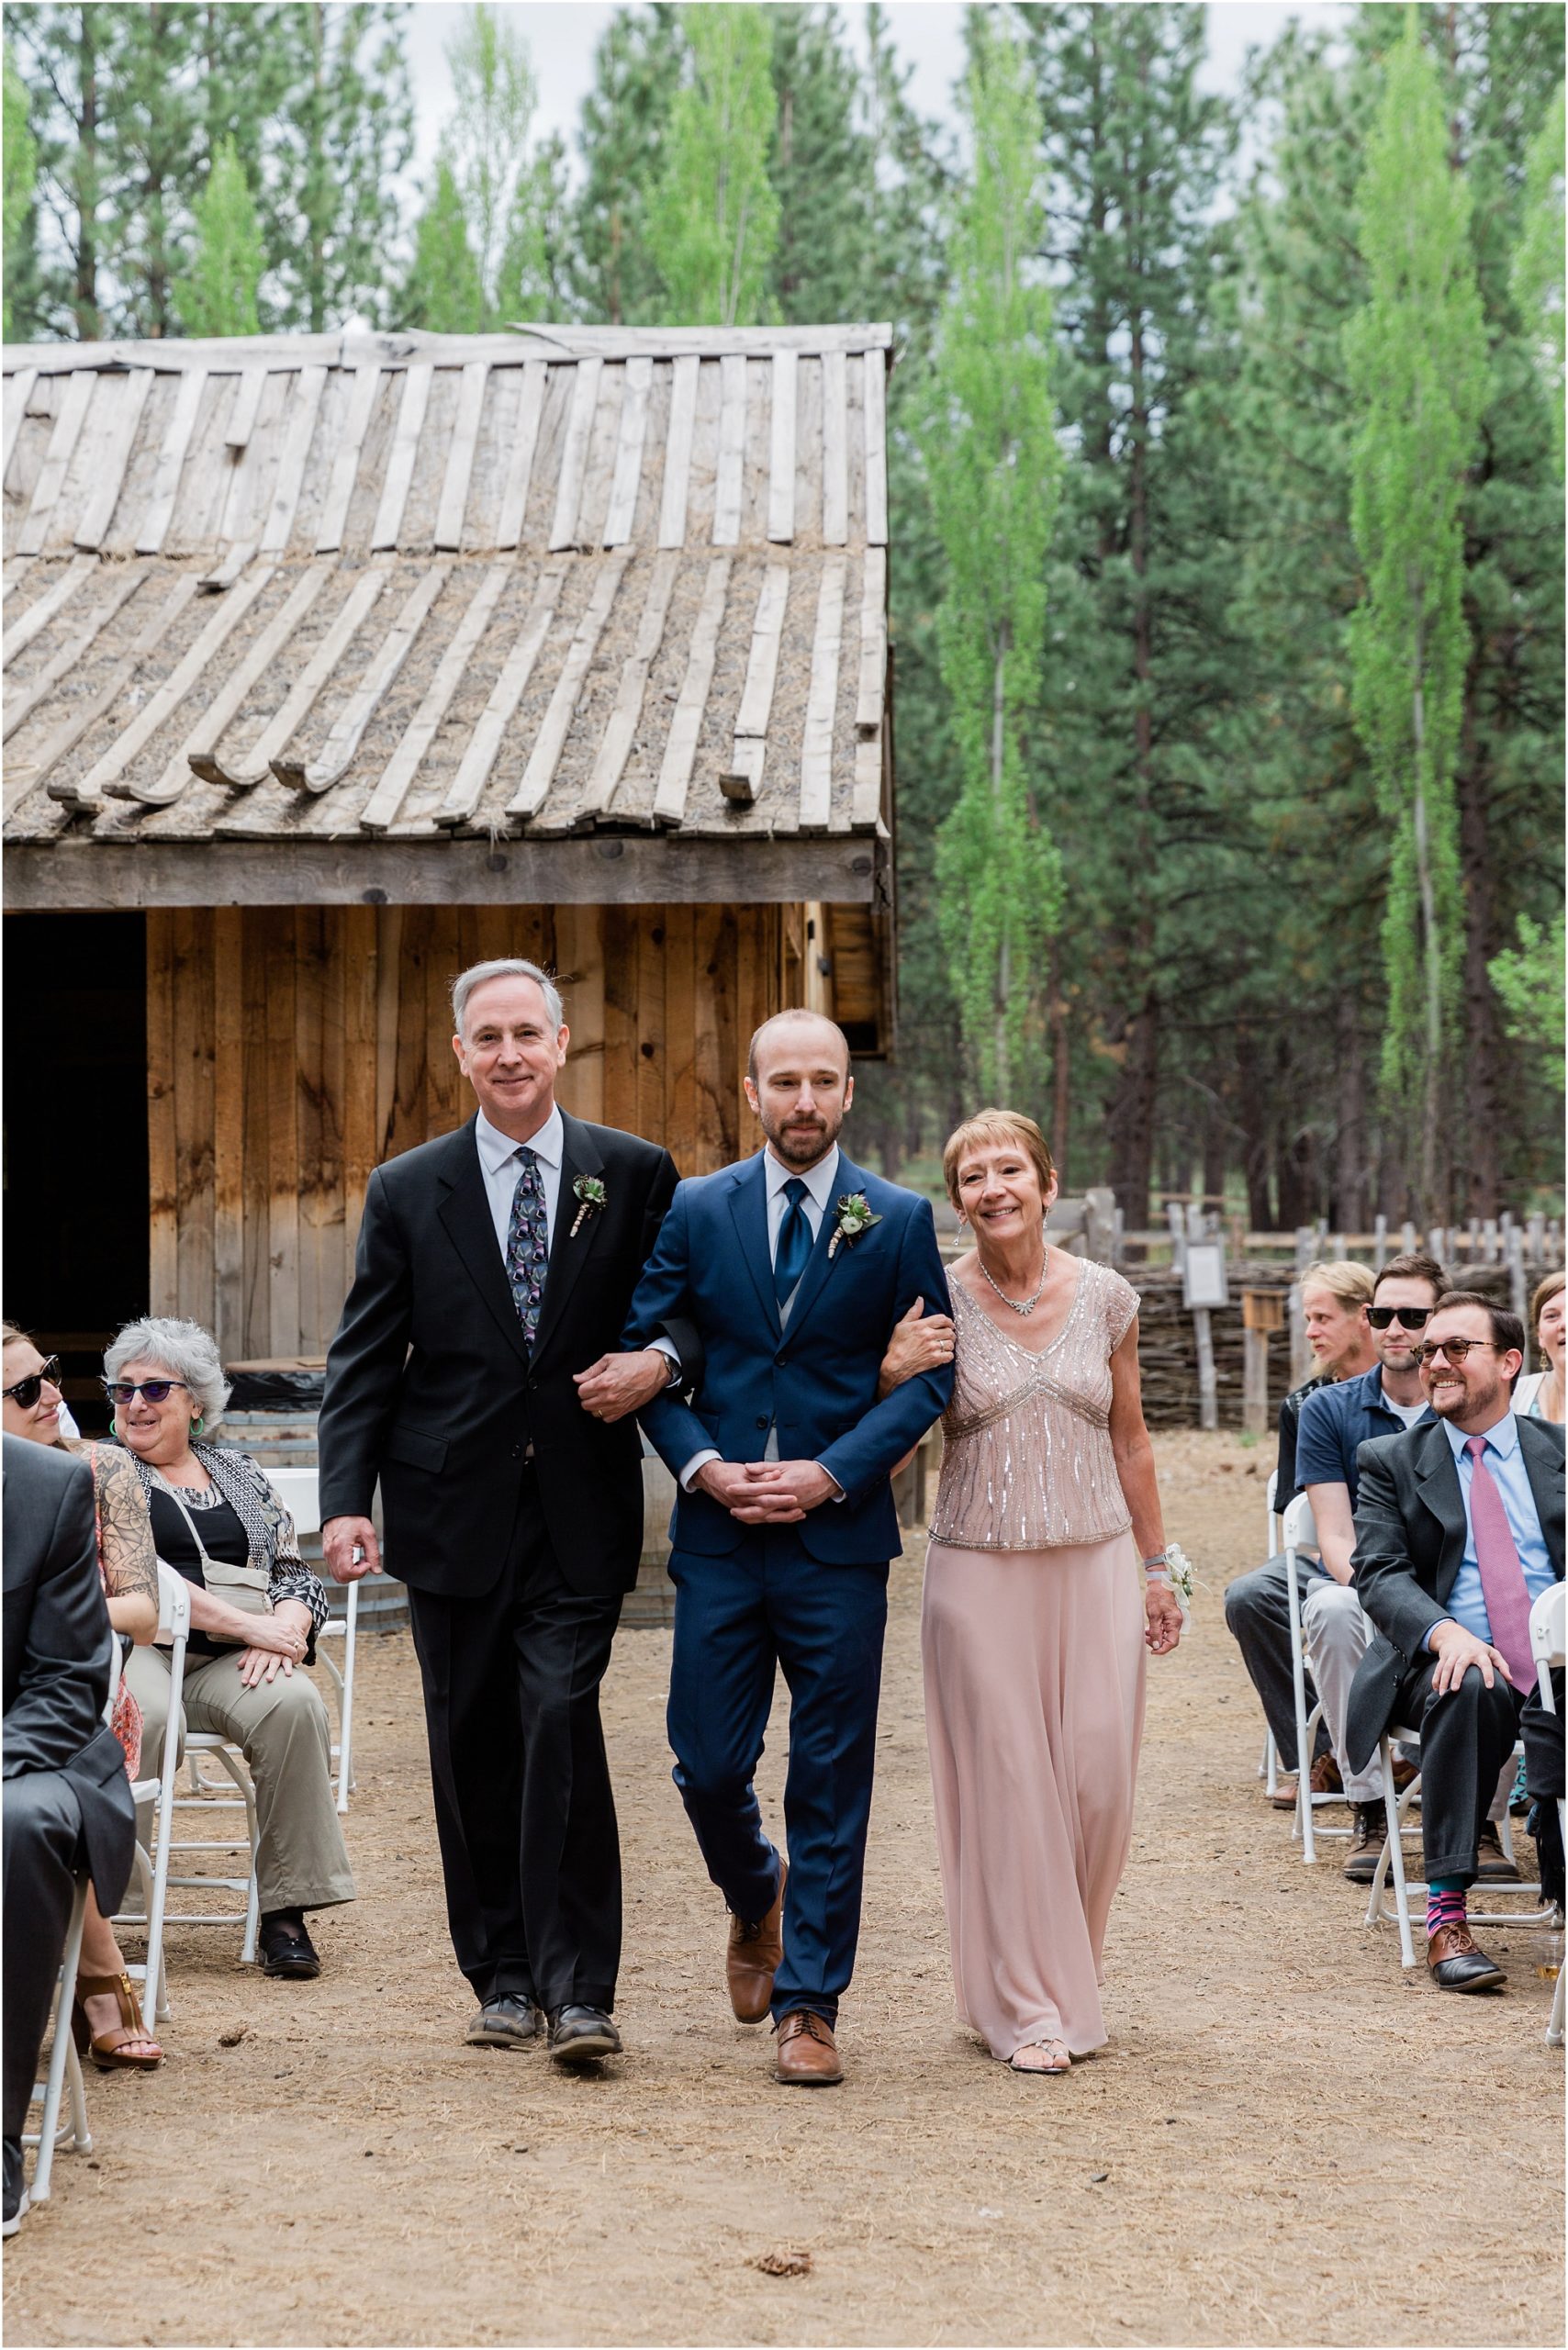 The groom escorts his parents down the dirt aisle wearing his cobalt blue suit as he prepares for his wedding ceremony in Bend, OR. | Erica Swantek Photography